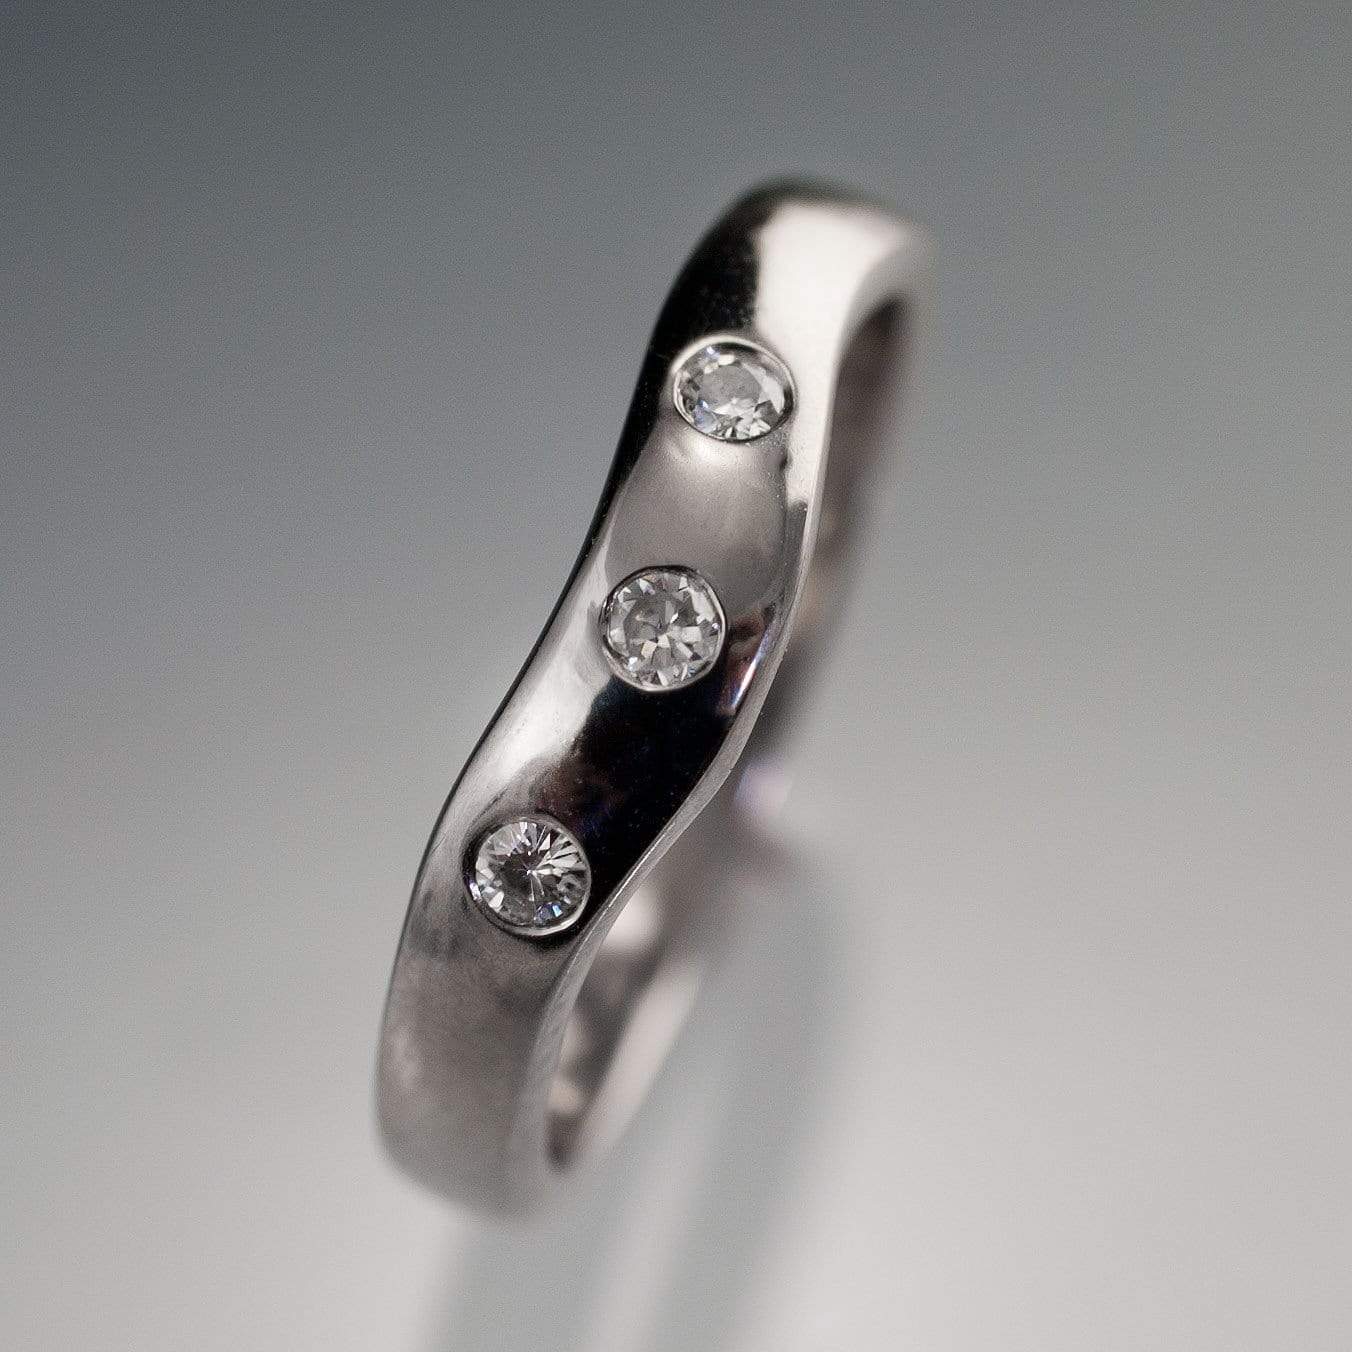 Diamond Fitted Contoured Wedding Ring, Diamond Shadow Band Ring by Nodeform